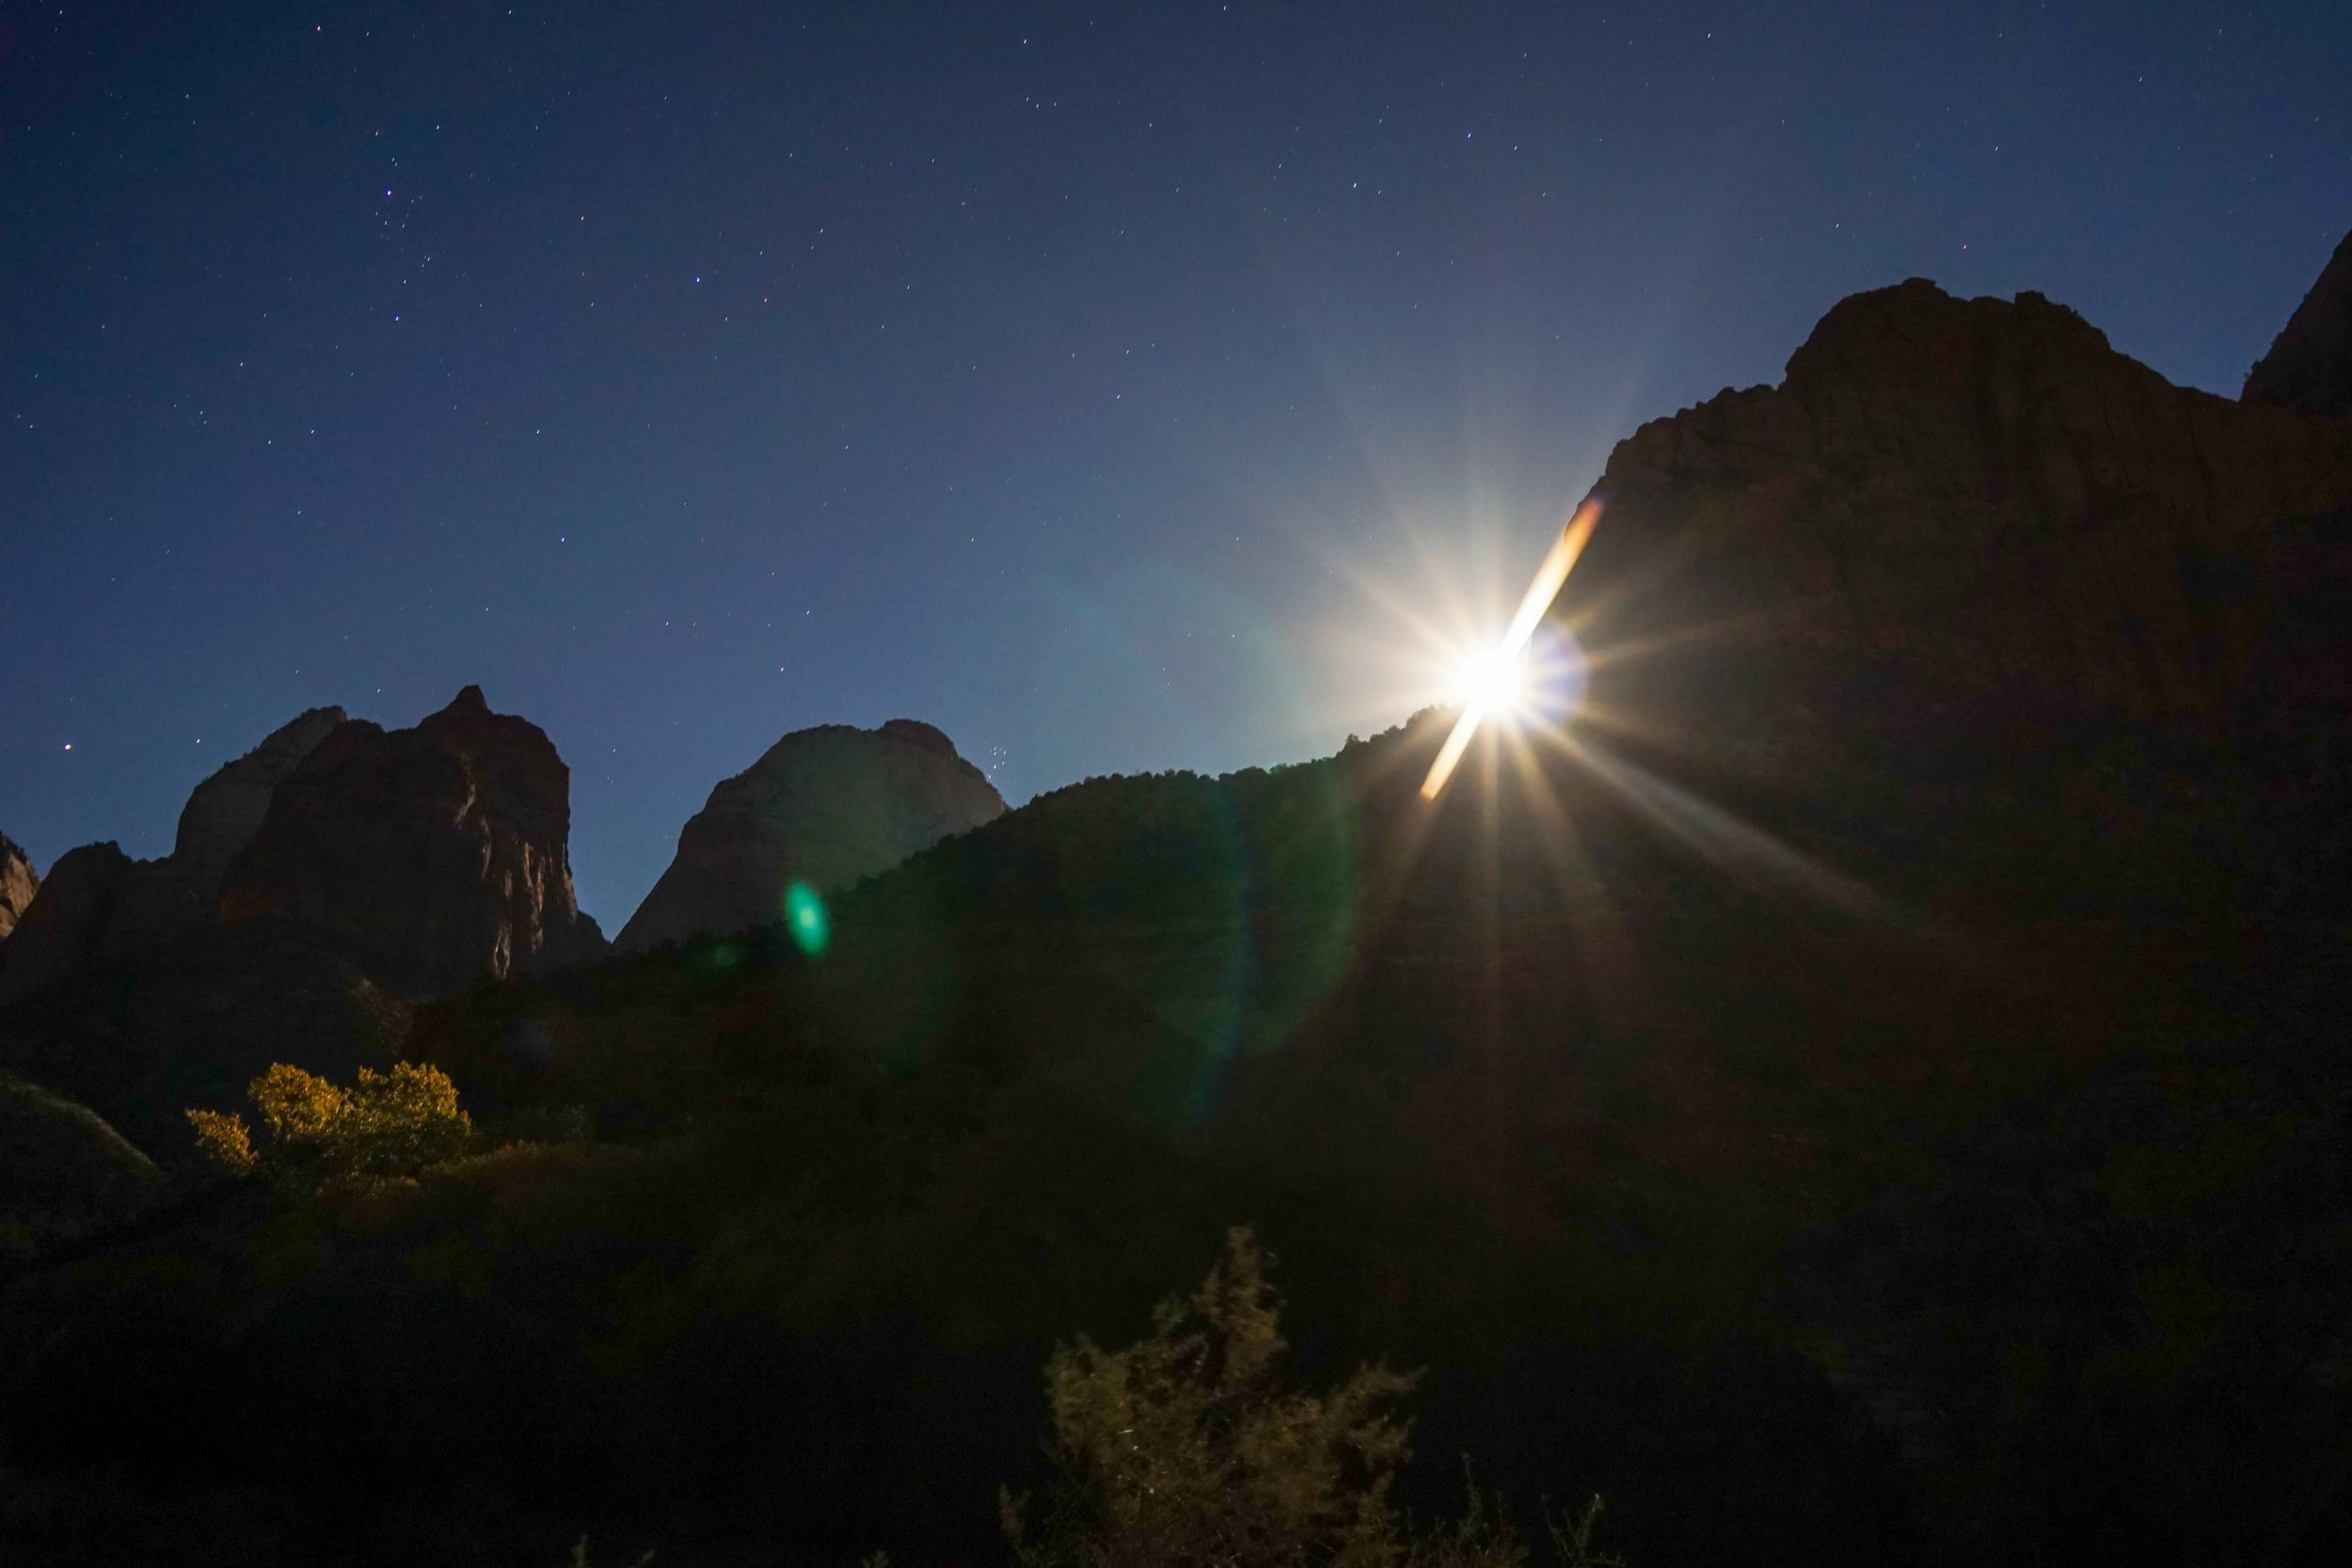 Another blessing in disguise. The moon lit up the cathedrals of Zion as it rose above the towering canyon walls. Totally worth the extra ass kicking.